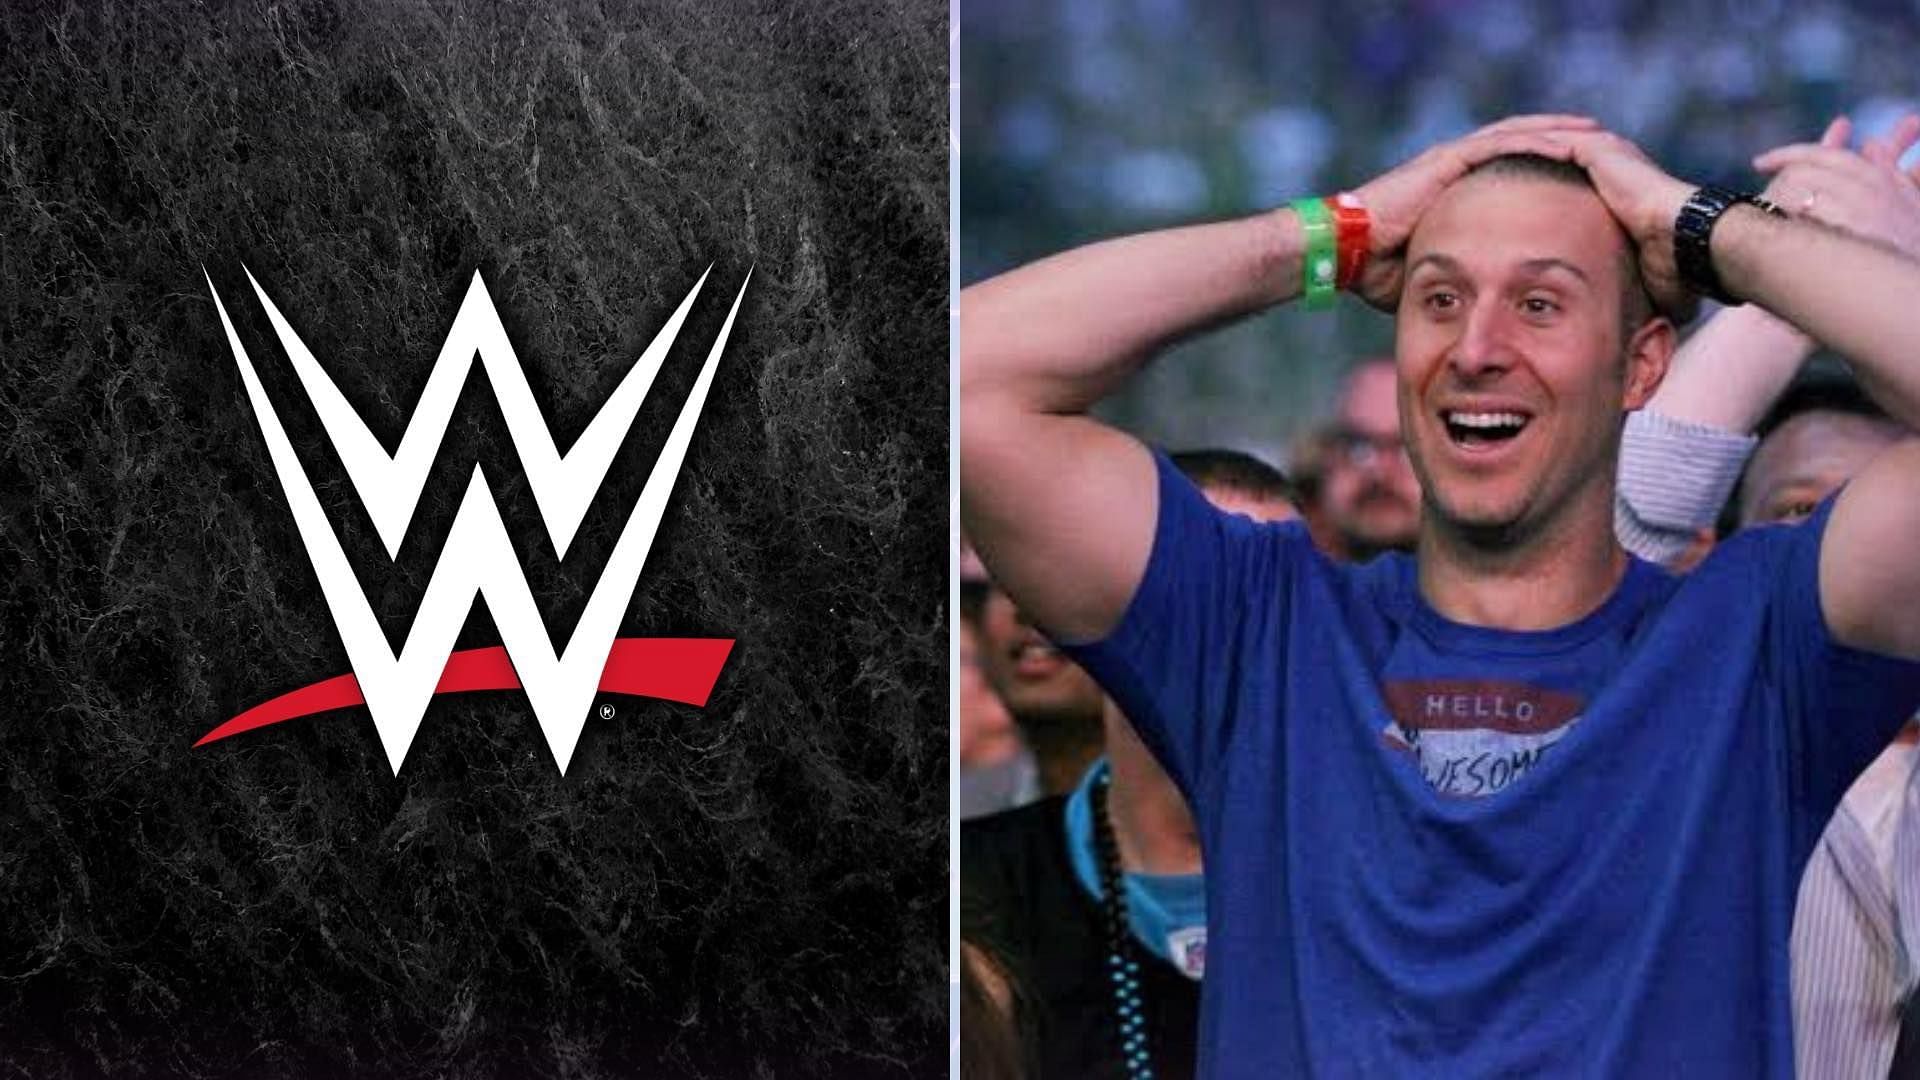 Current WWE star explained his recent actions